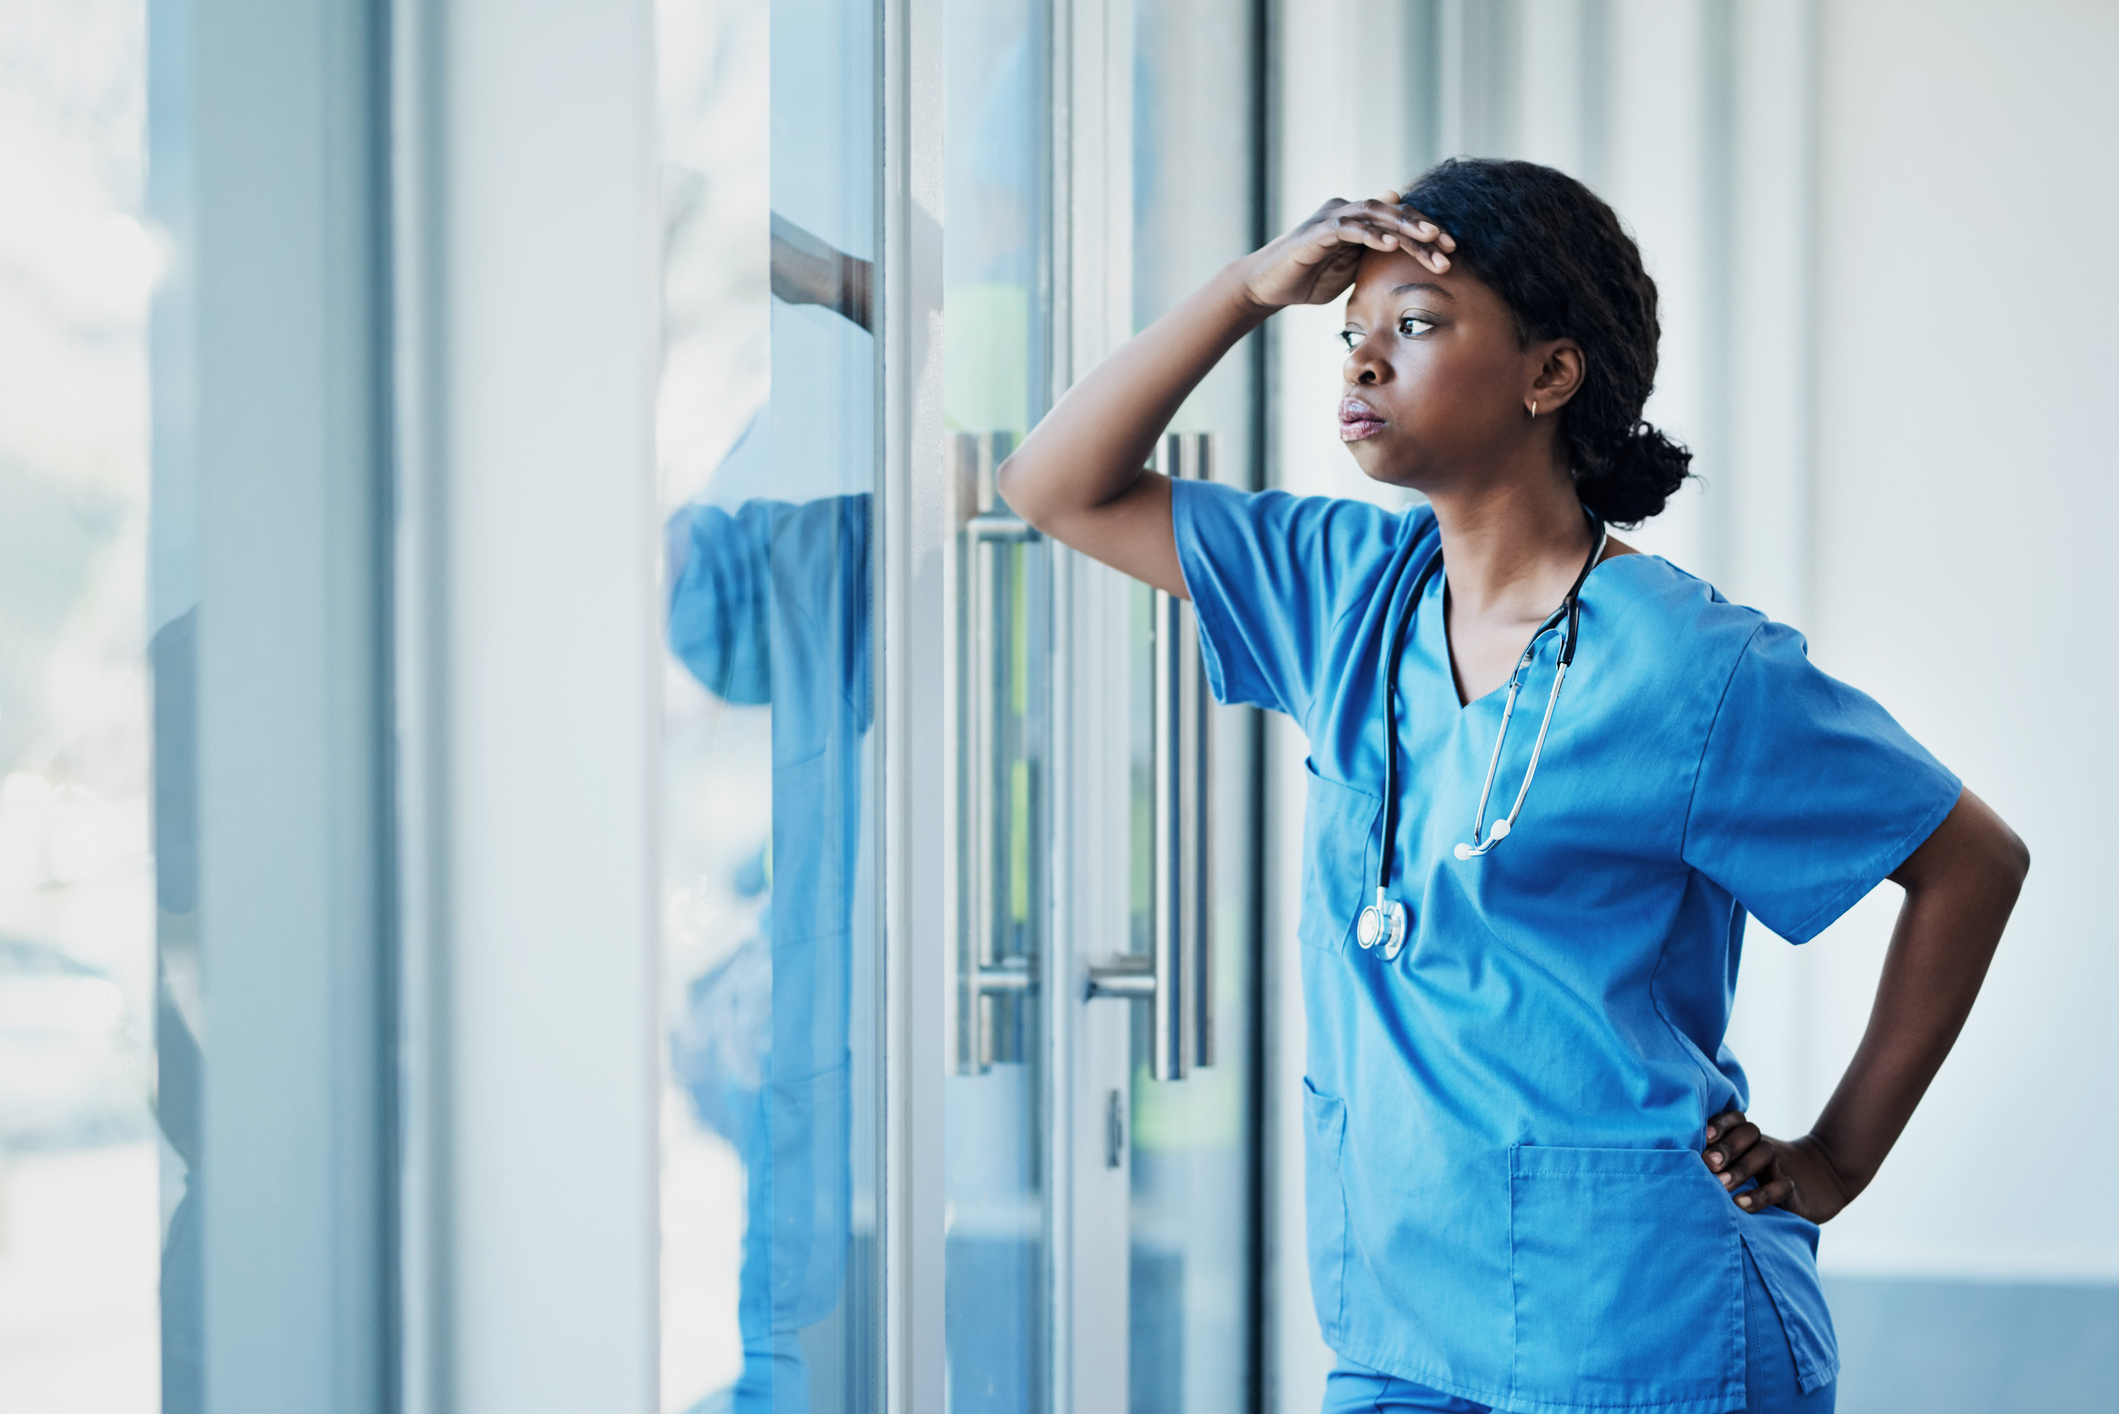 Healthcare professional in scrubs looking out the window with a thoughtful expression